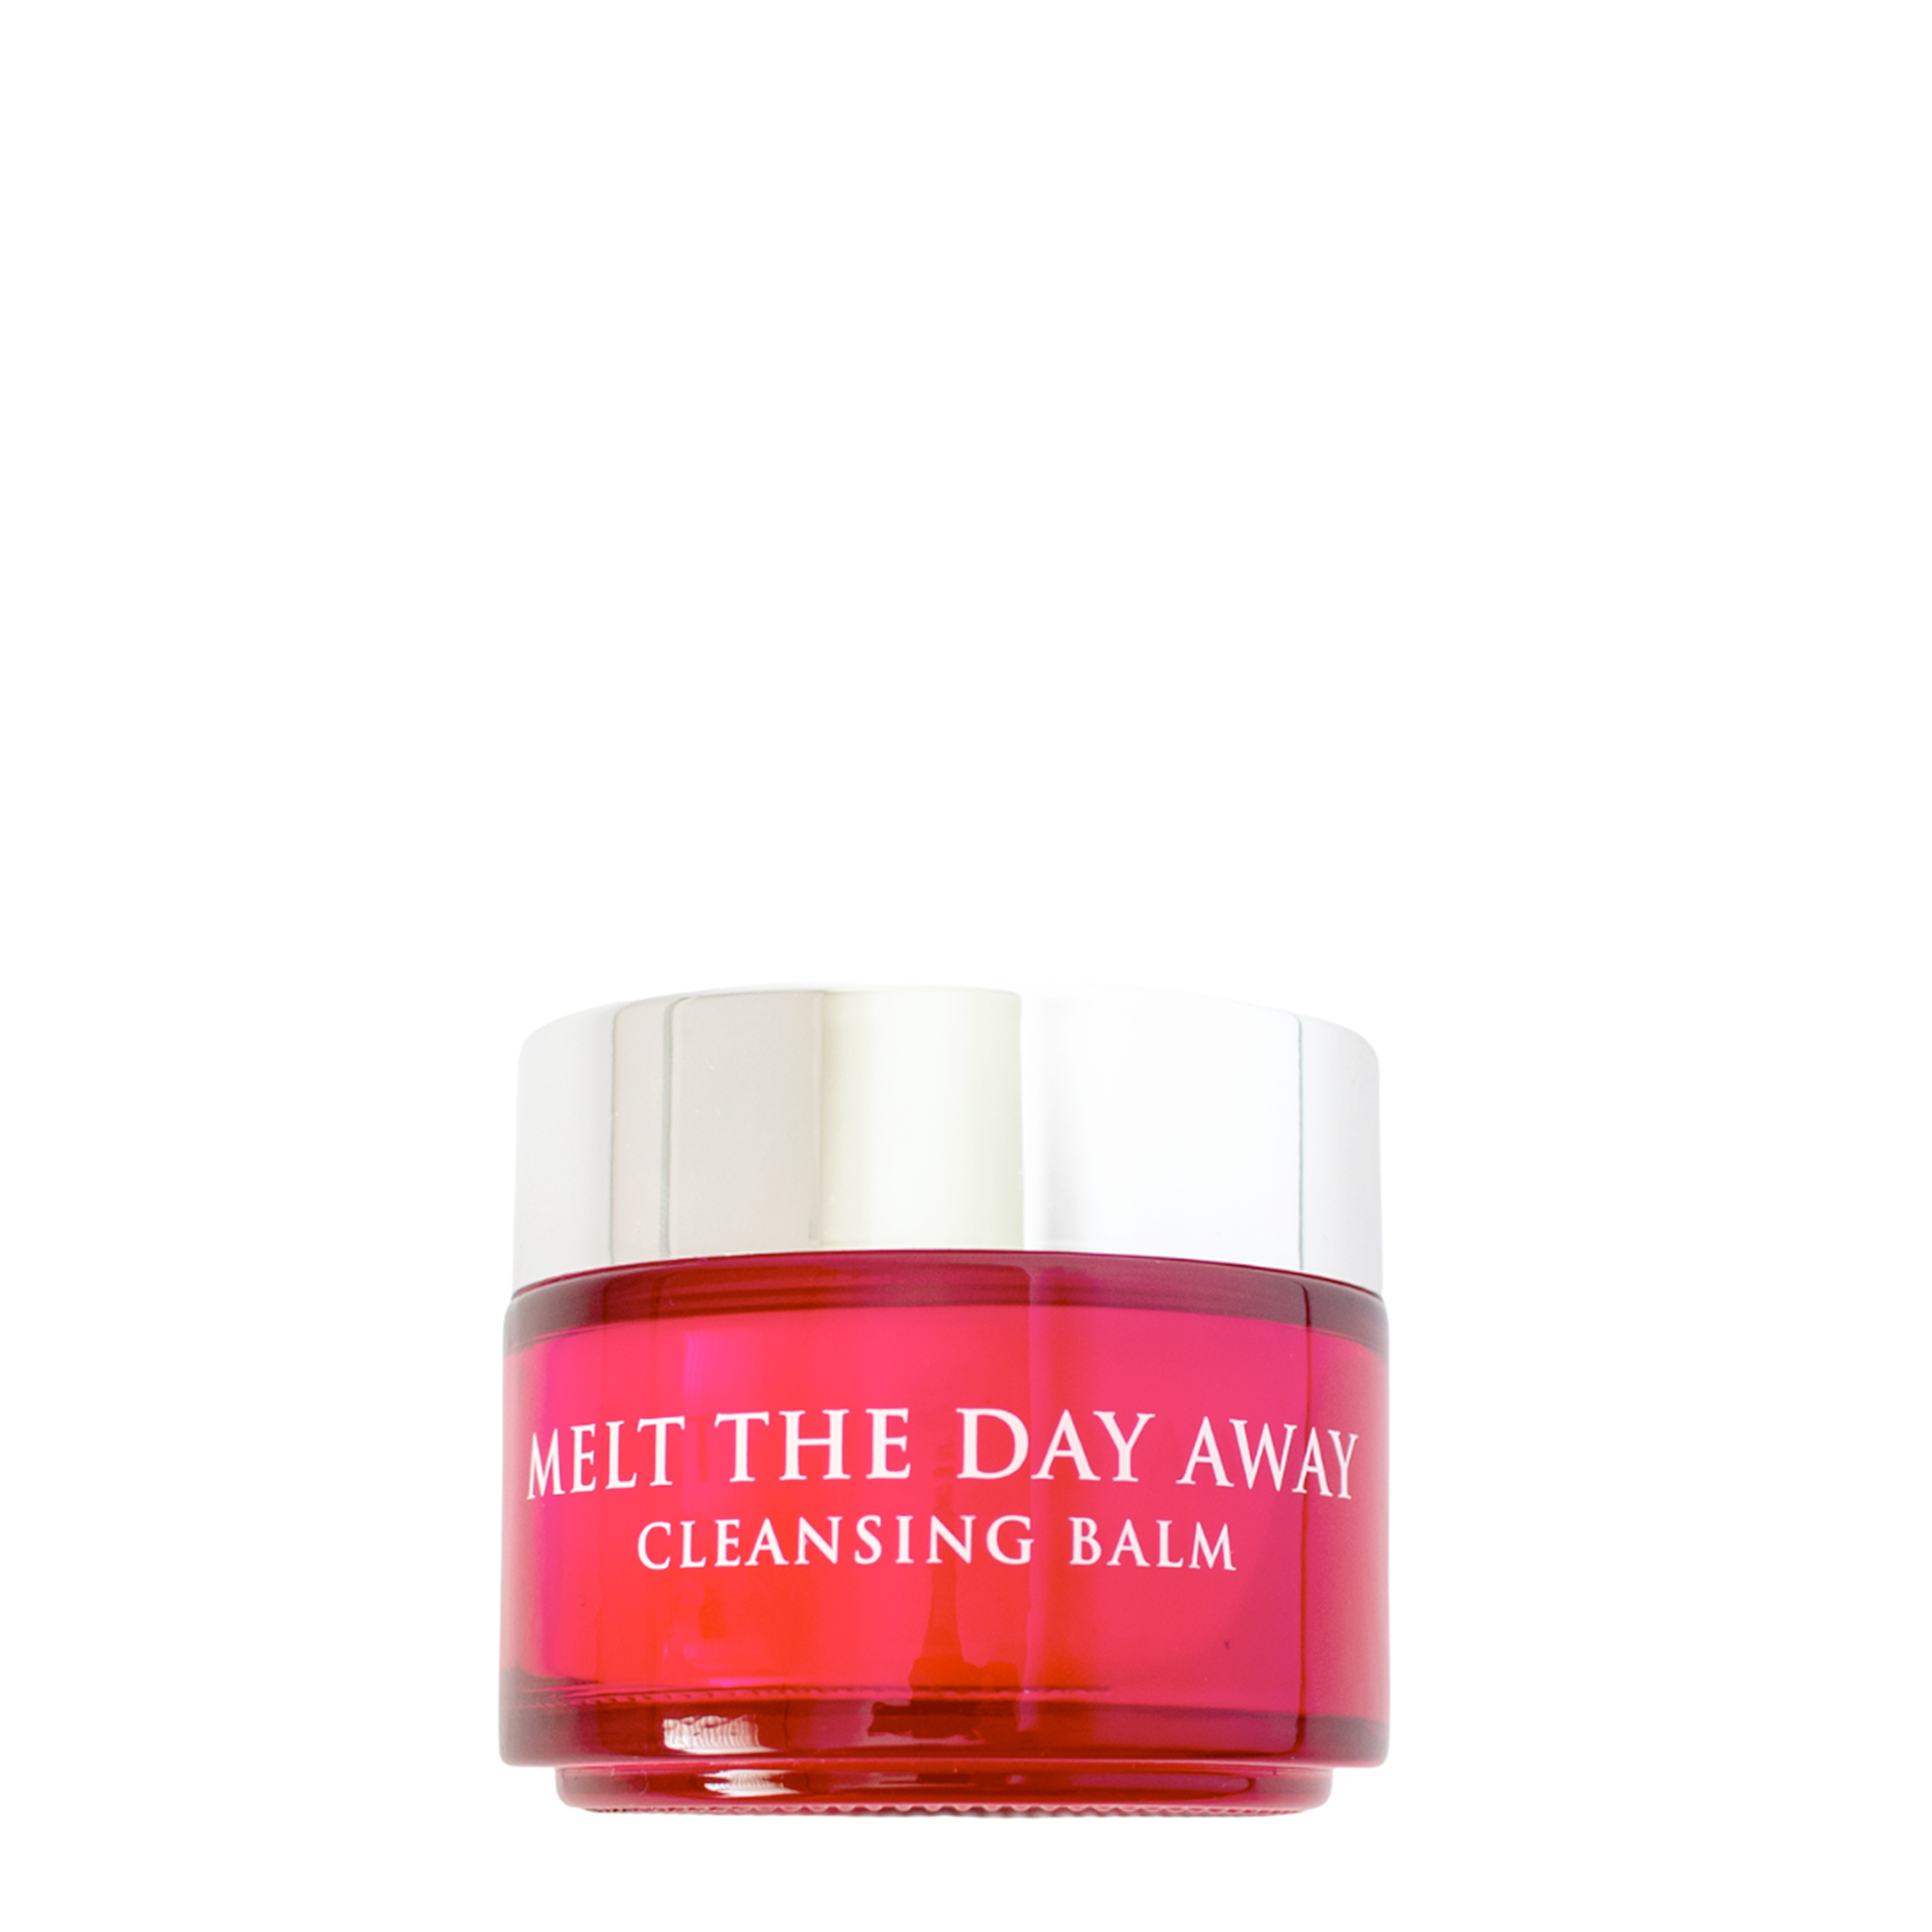 Melt the Day Away Cleansing Balm